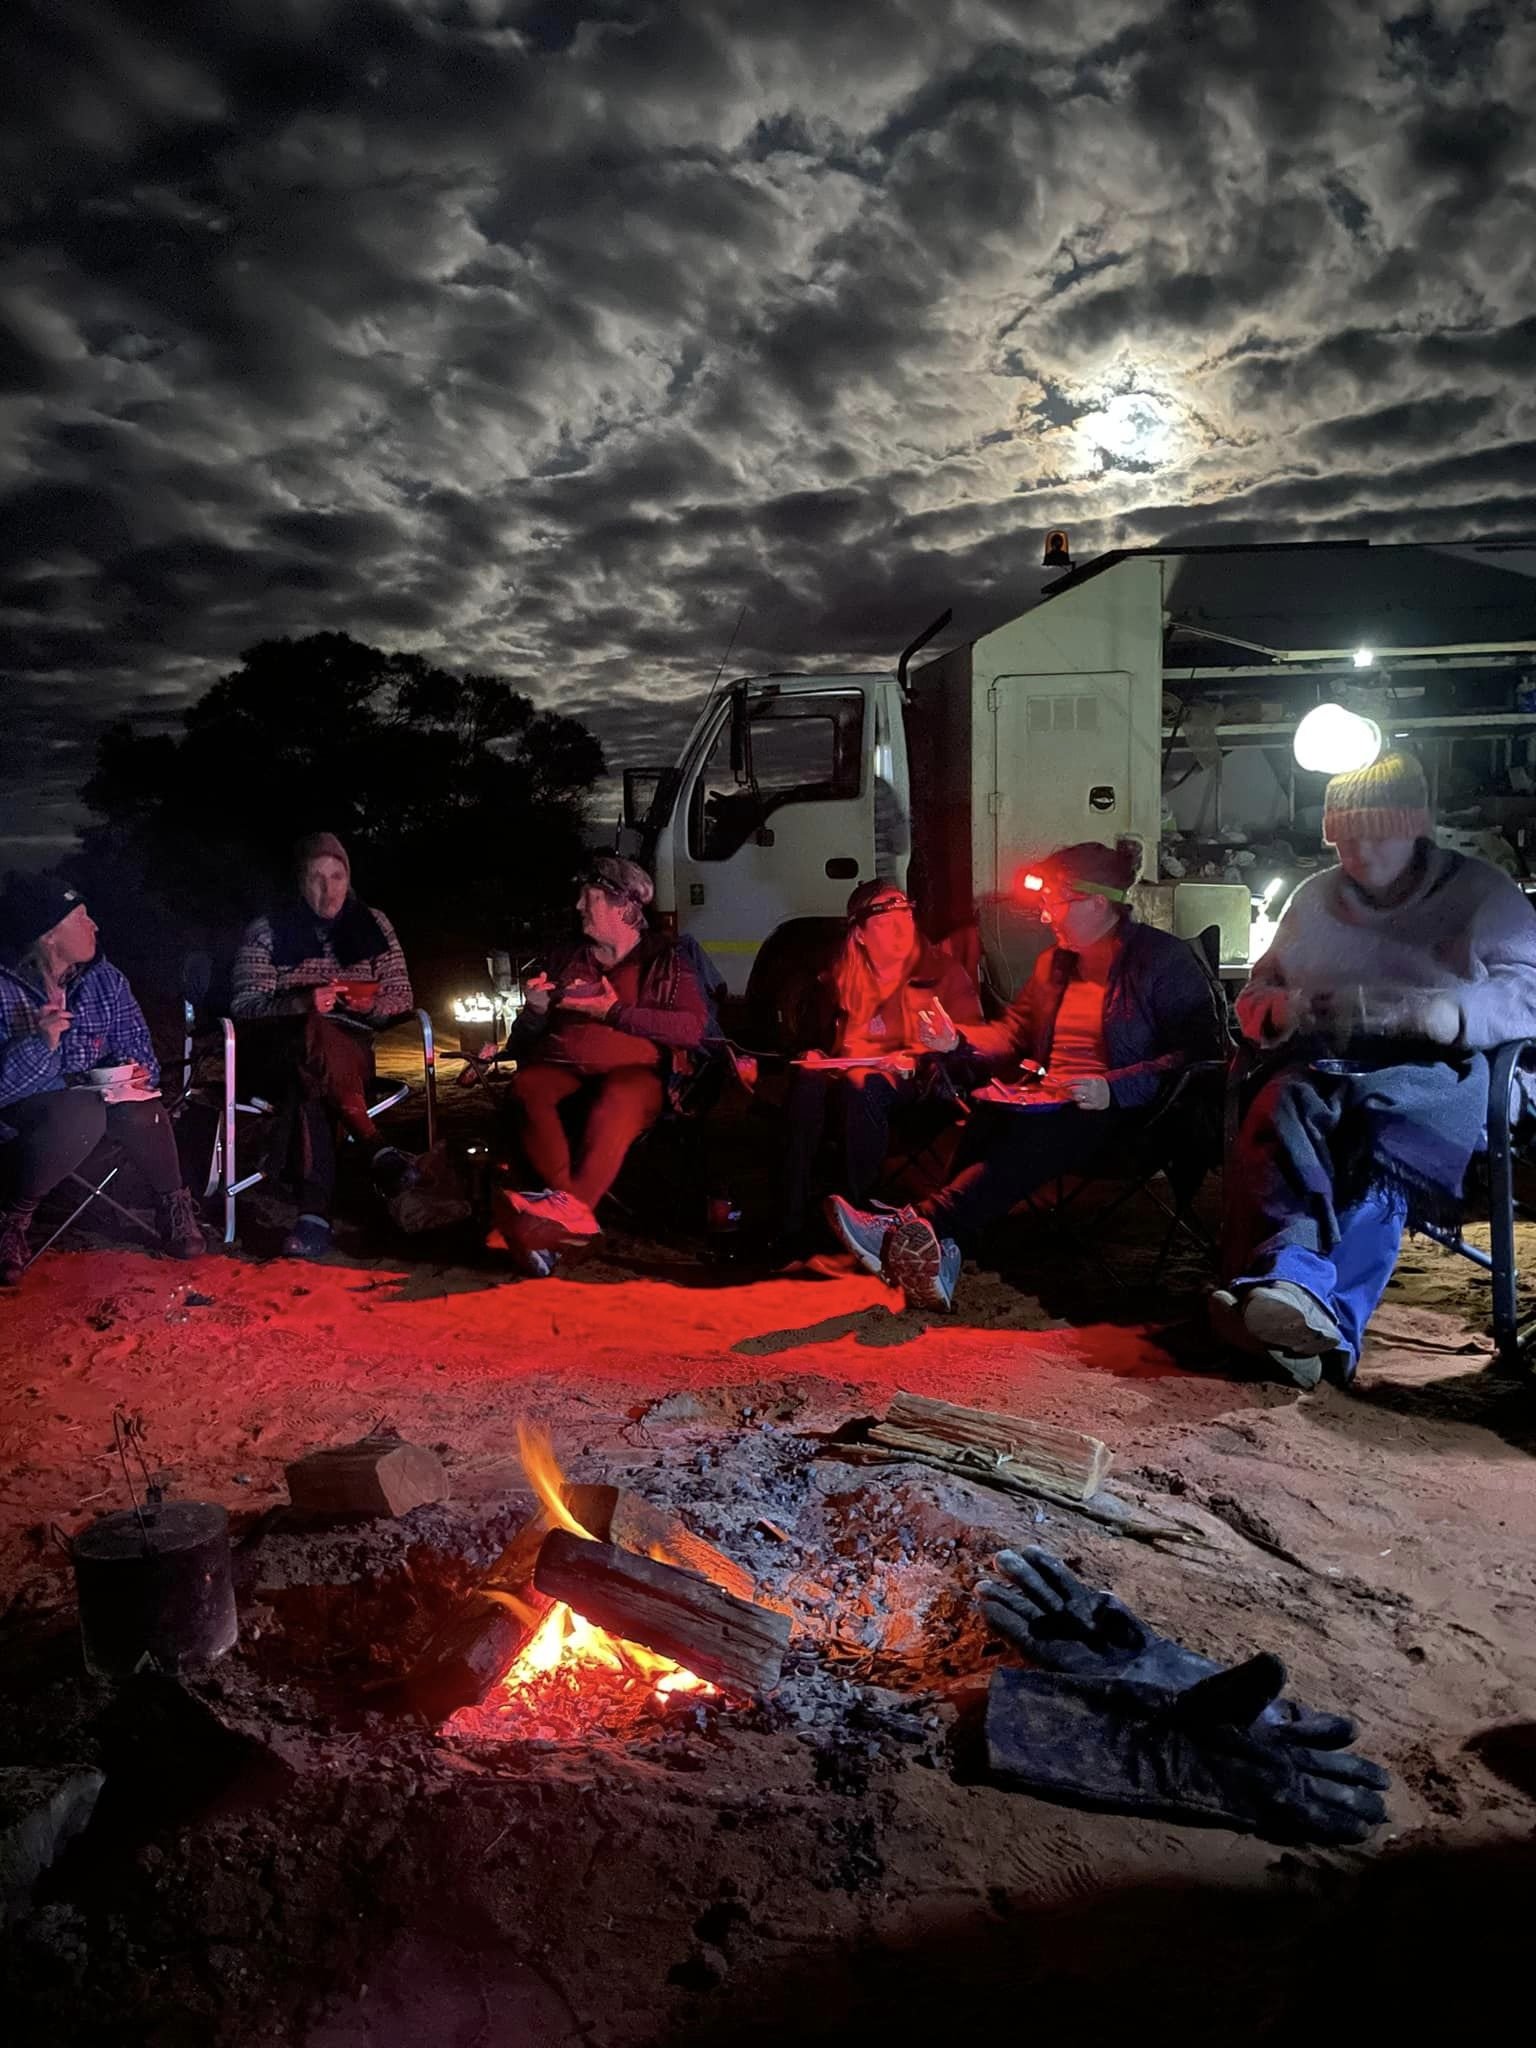 Around the campfire at full moon - image courtesy of Jodie Warrick, 2022